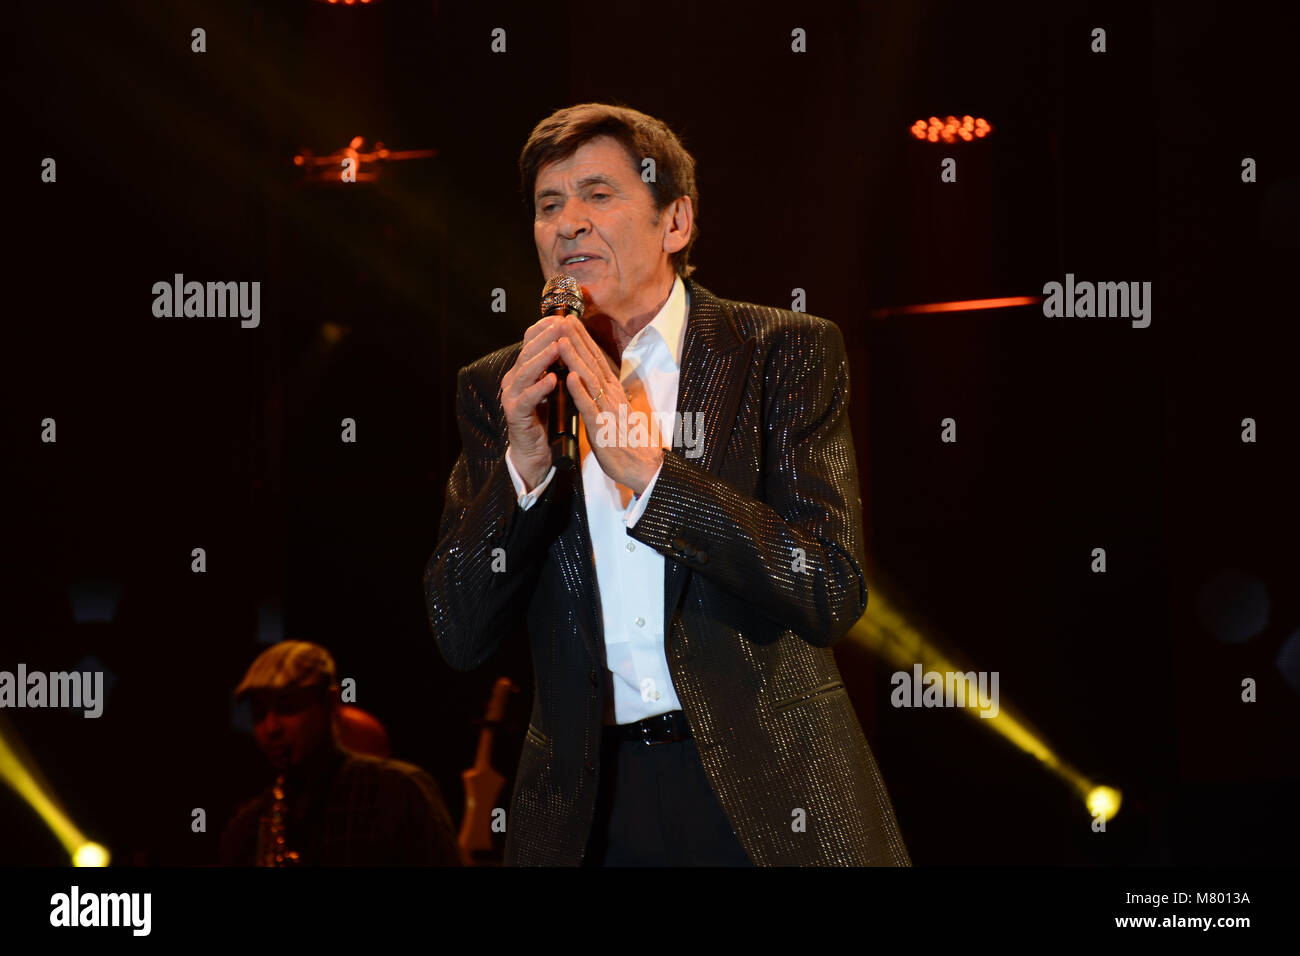 Naples, Italy. 13th Mar, 2018. Gianni Morandi, Italian pop singer, actor and entertainer, performs live in Naples at Teatro Palapartenope with 'D'amore D'autore Tour'. Credit: Mariano Montella/Alamy Live News Stock Photo